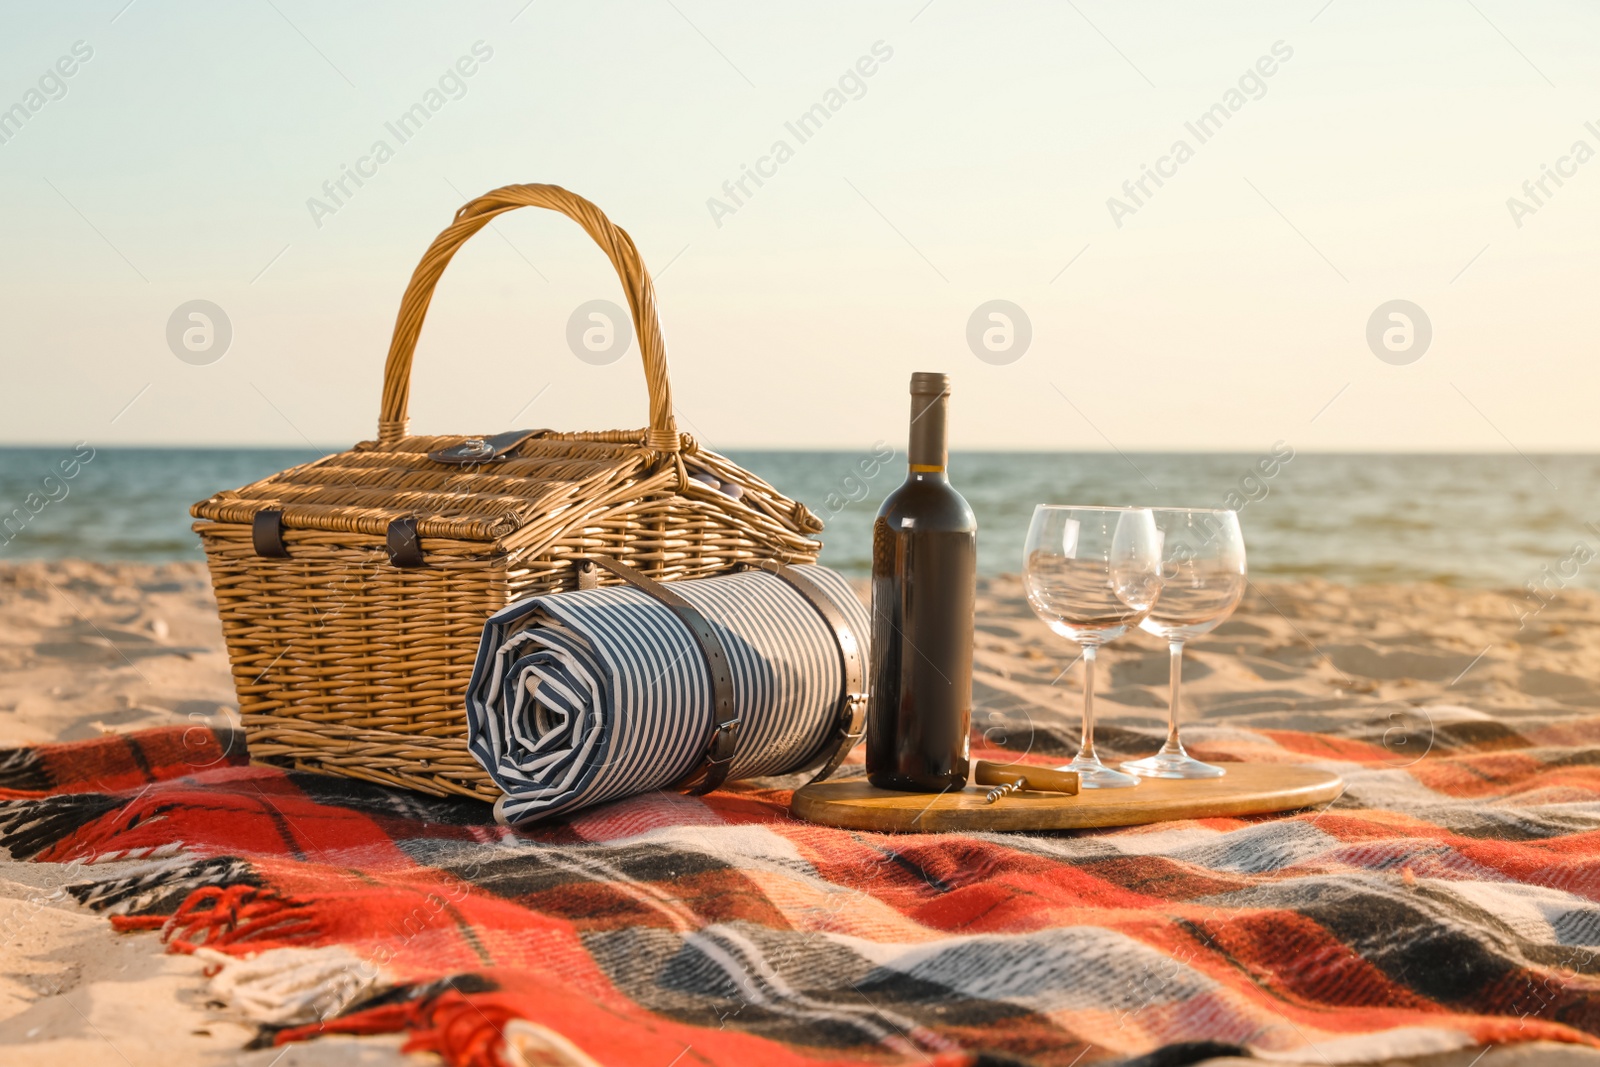 Photo of Blanket with picnic basket, corkscrew, bottle of wine and glasses on sandy beach near sea